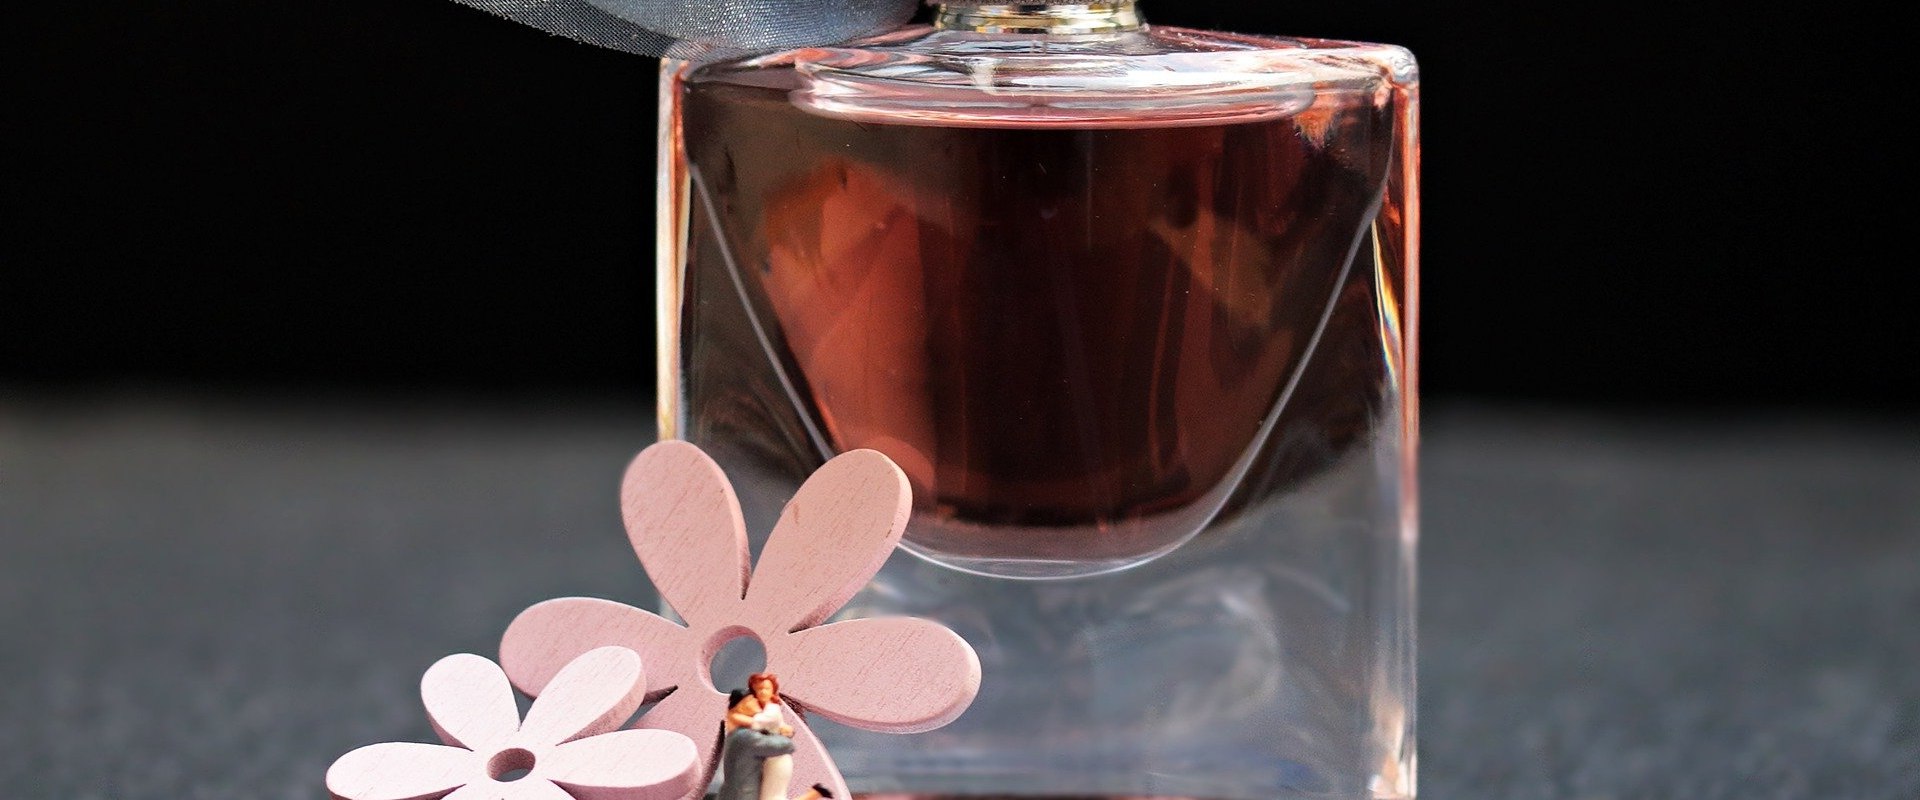 The Differences in Prices between Designer and Niche Fragrances